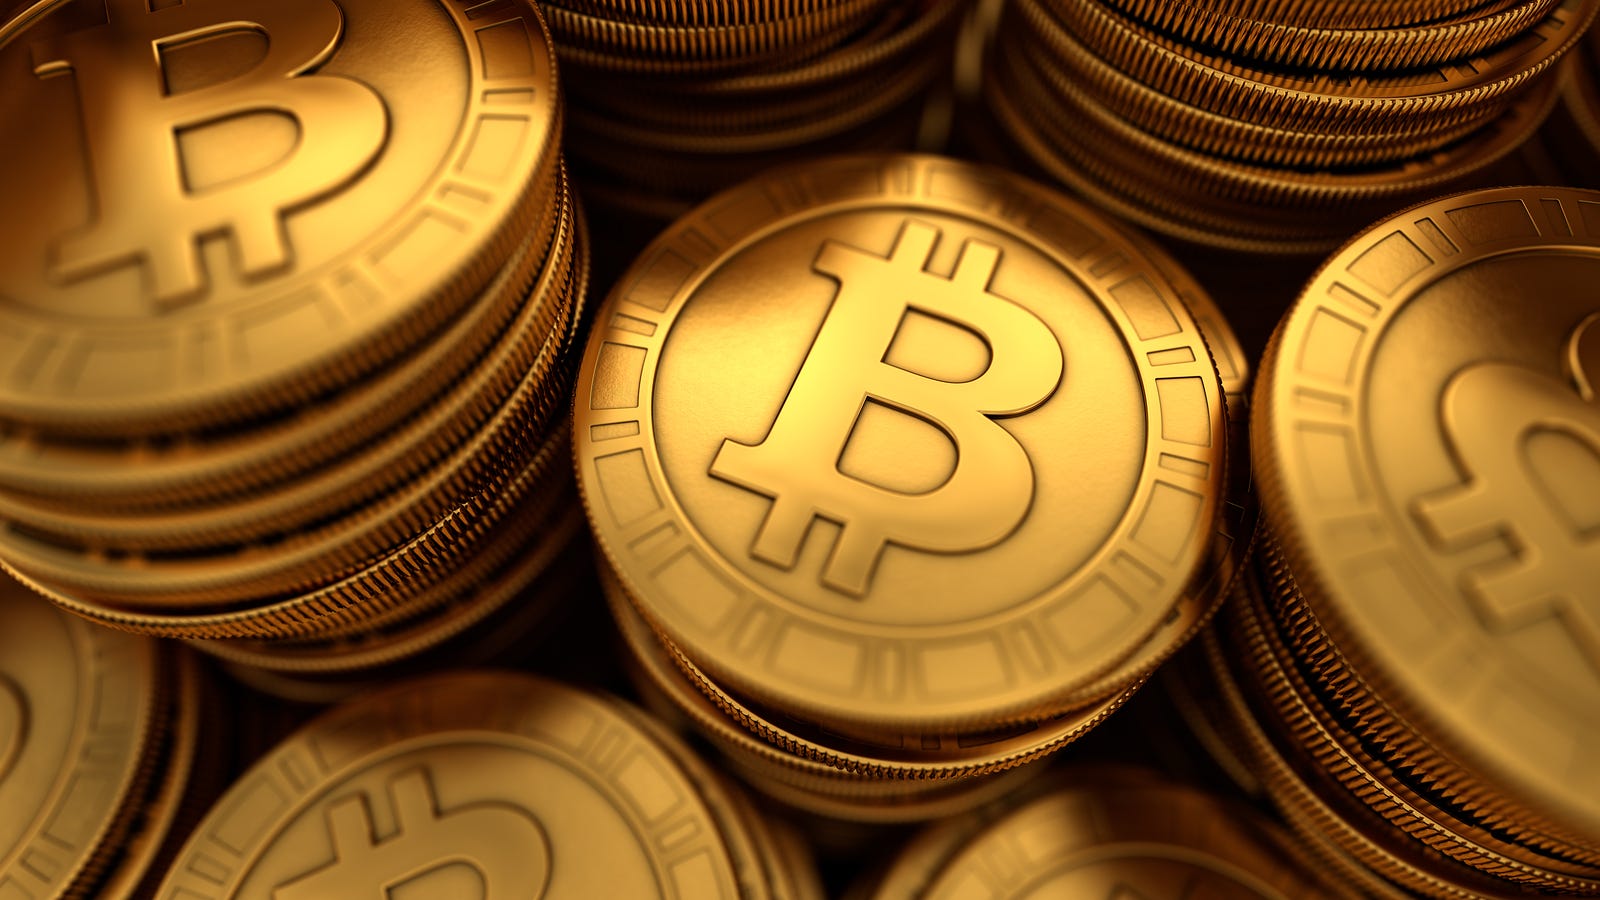 The Science Of Bitcoin Explained In The Simplest Way - 